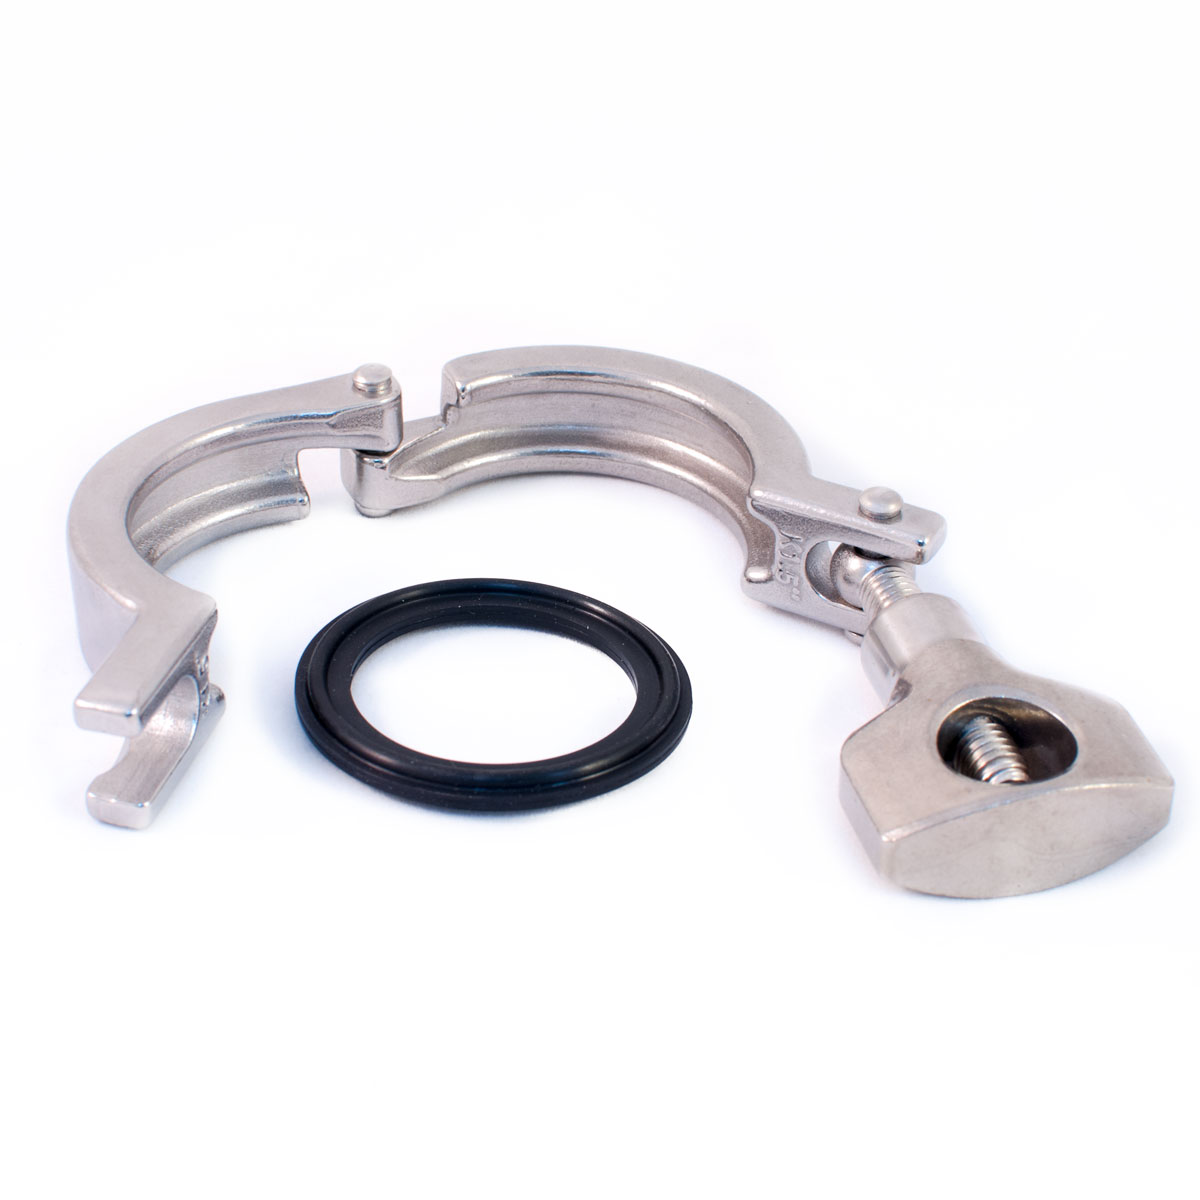 C-Clamp for Juice Tray w/ Gasket